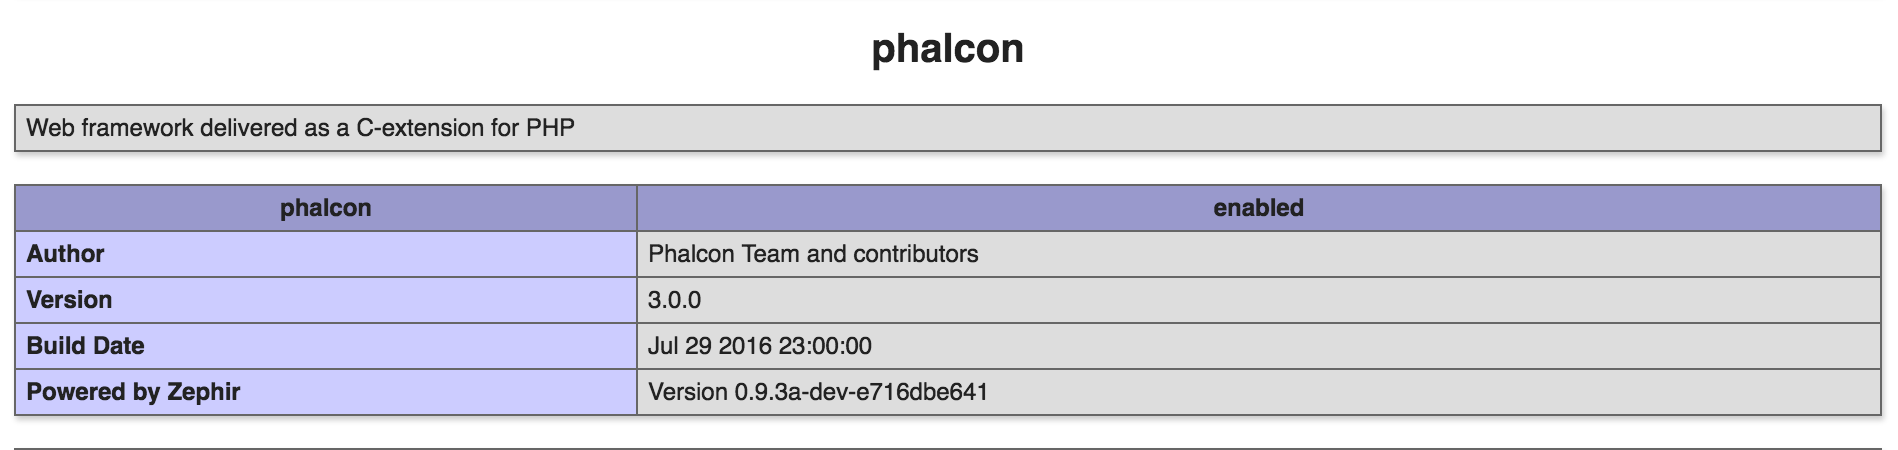 Phalcon is active in phpinfo